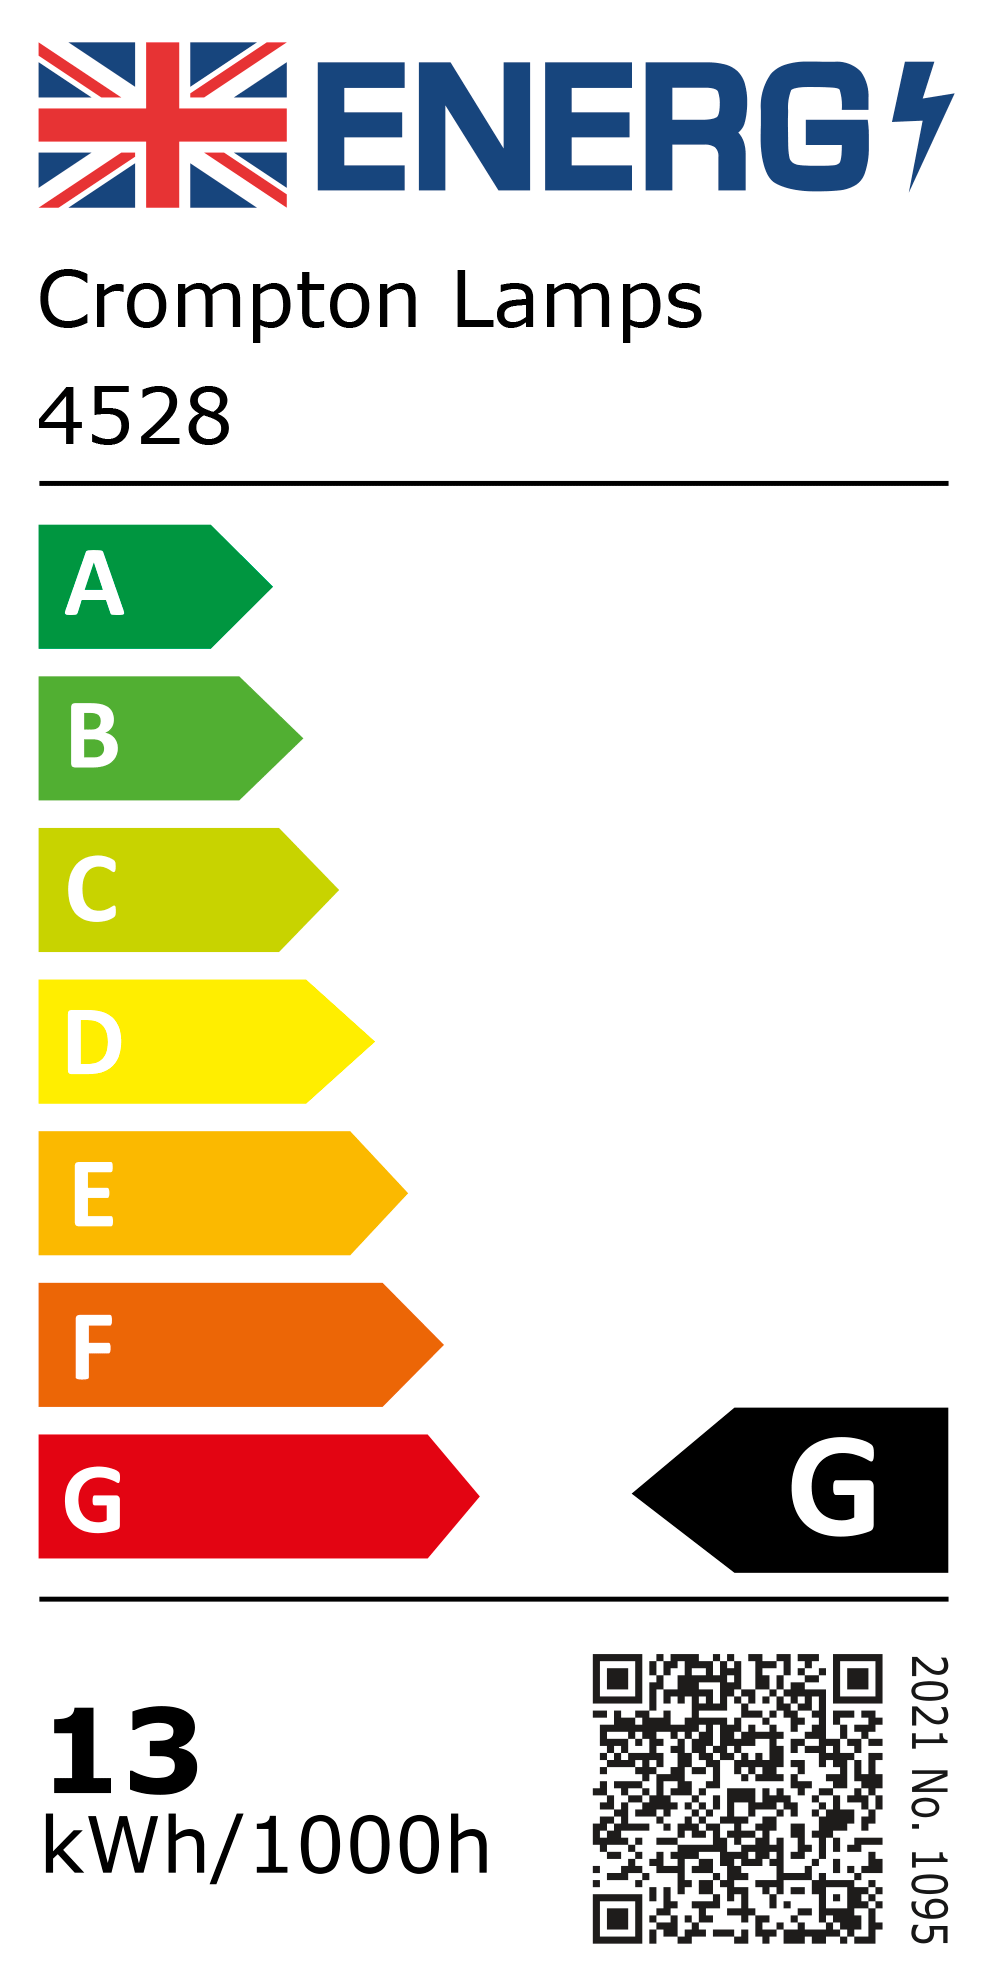 New 2021 Energy Rating Label: Stock Code 4528